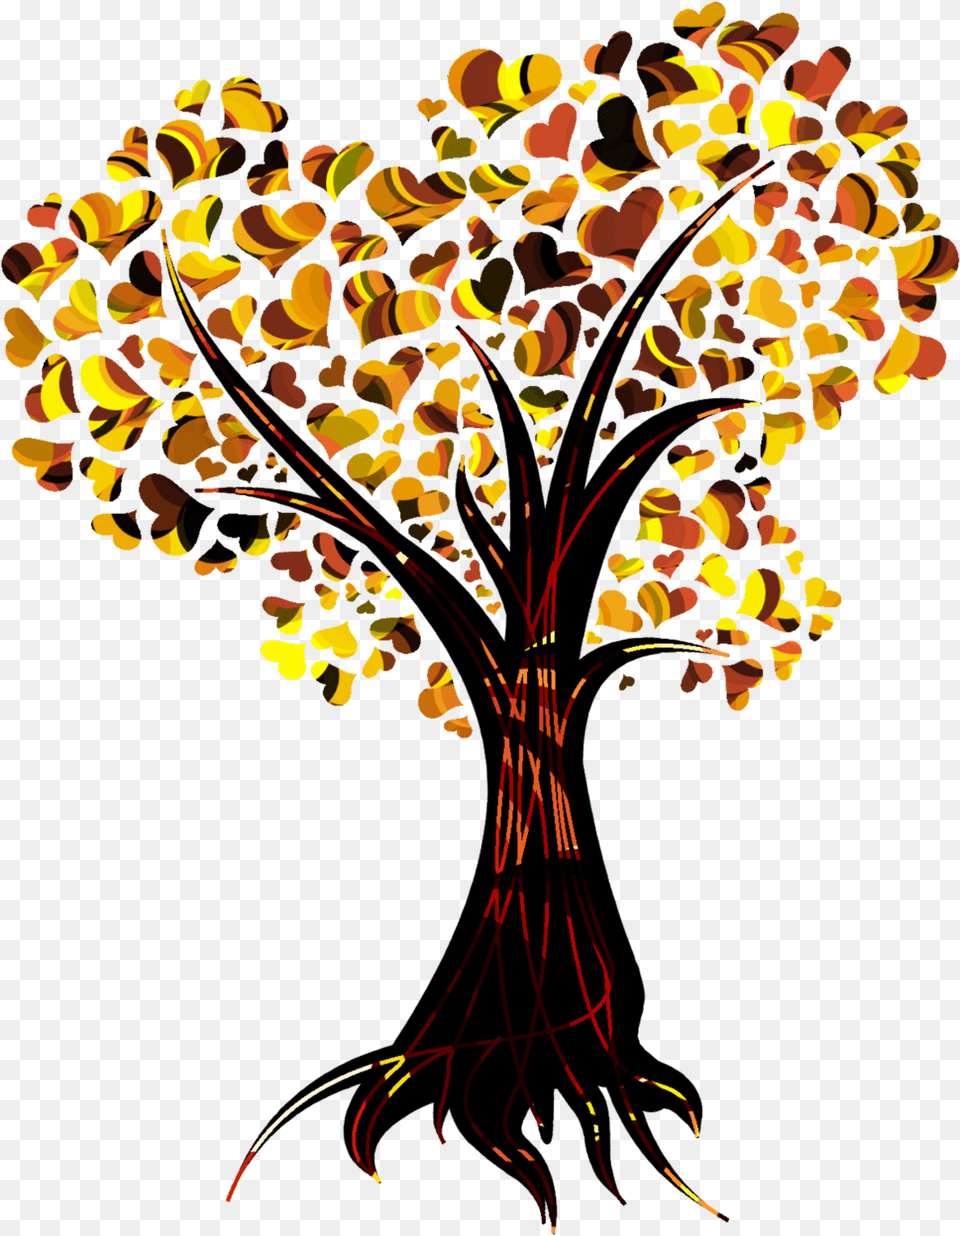 Tree Heart Autumn Leaf Color Clip Art Hearts In Fall Colors, Floral Design, Graphics, Modern Art, Pattern Png Image